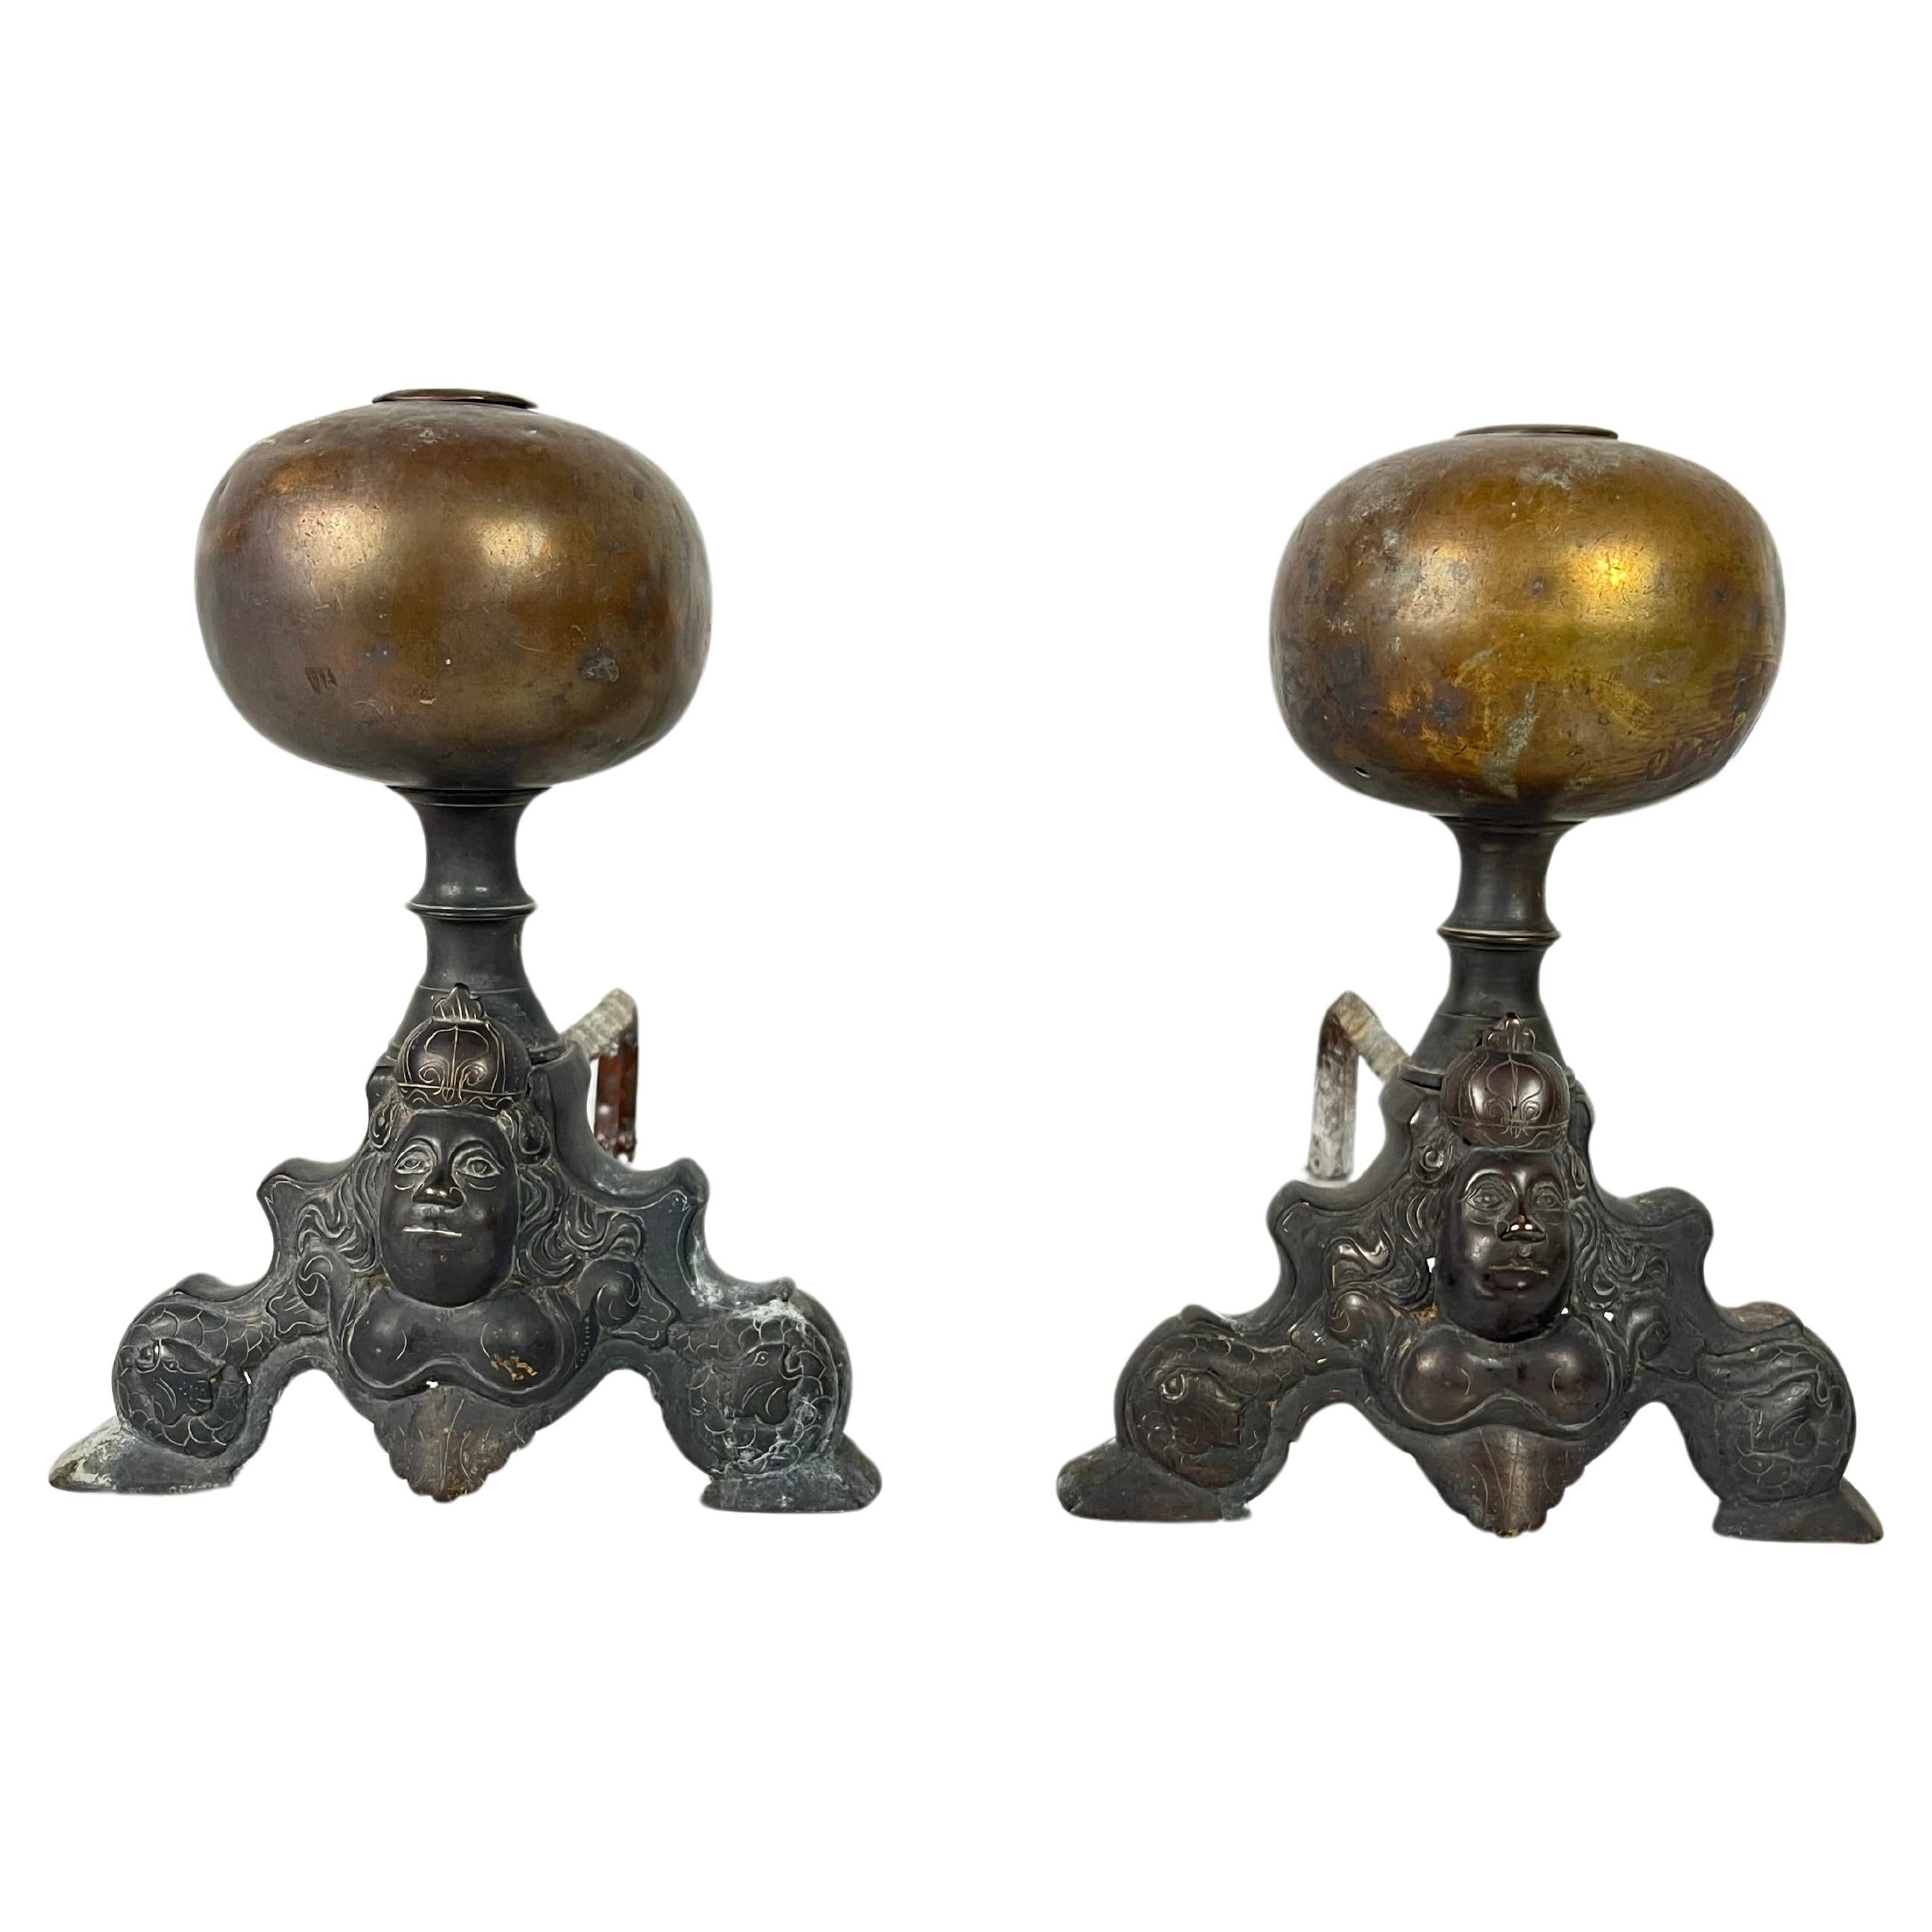 Pair of antique bronze fireplace andirons, Italy, 1940s
Found in a villa in the Sicilian hinterland.
Bronze and iron, intact but with signs of aging. Good condition.